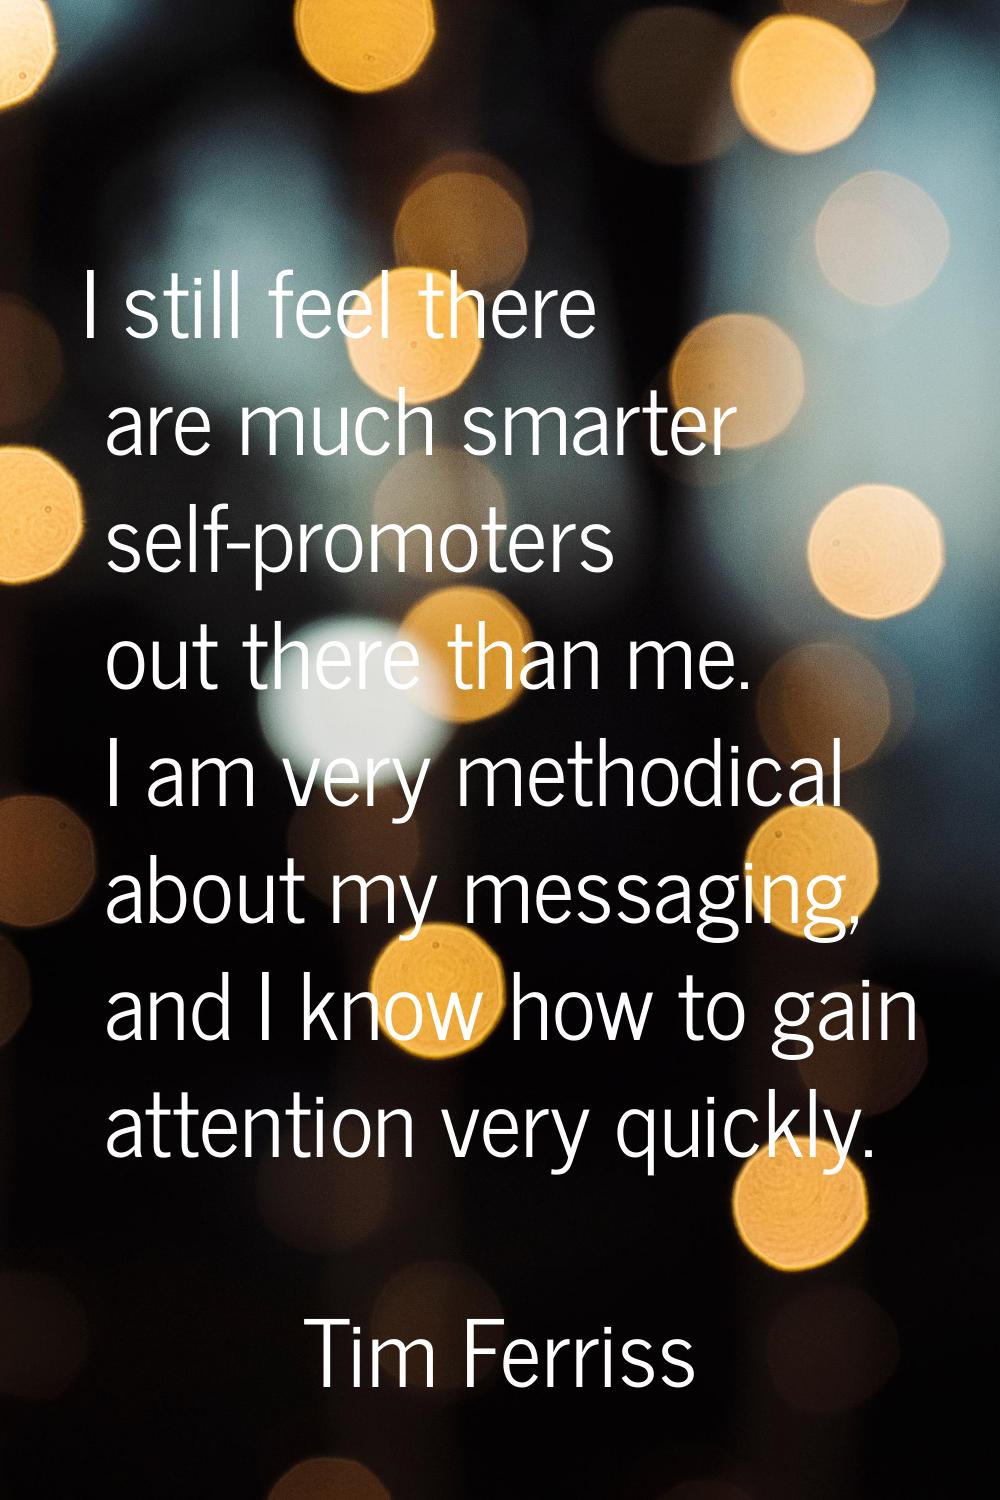 I still feel there are much smarter self-promoters out there than me. I am very methodical about my